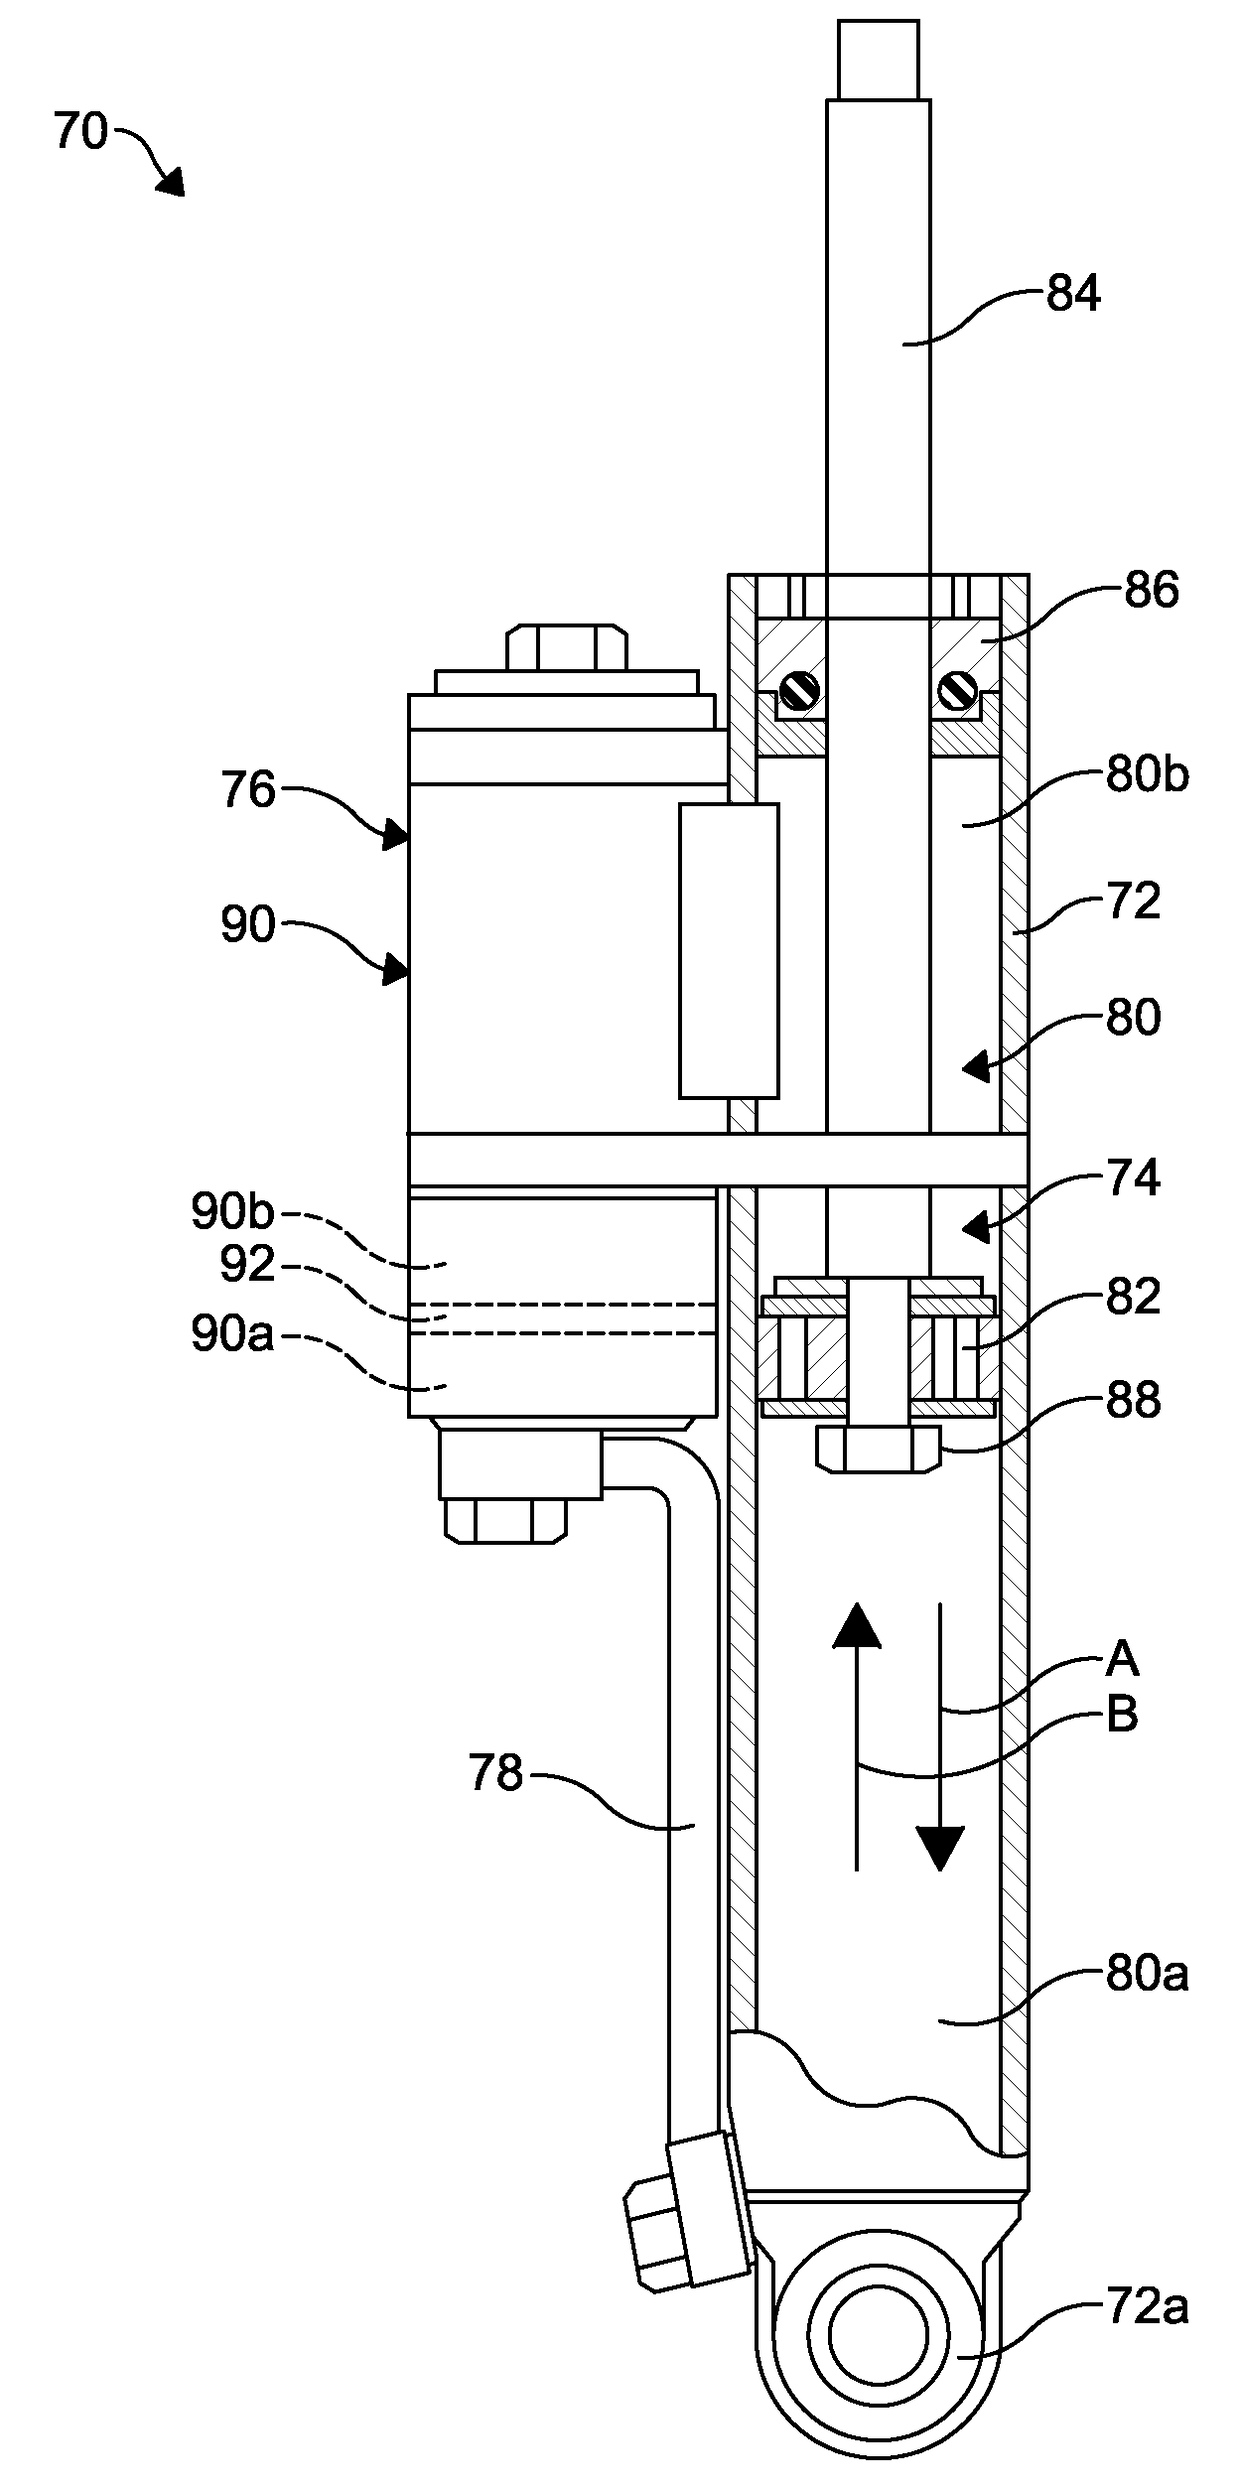 Three speed adjustable shock absorber having one or more microvalves